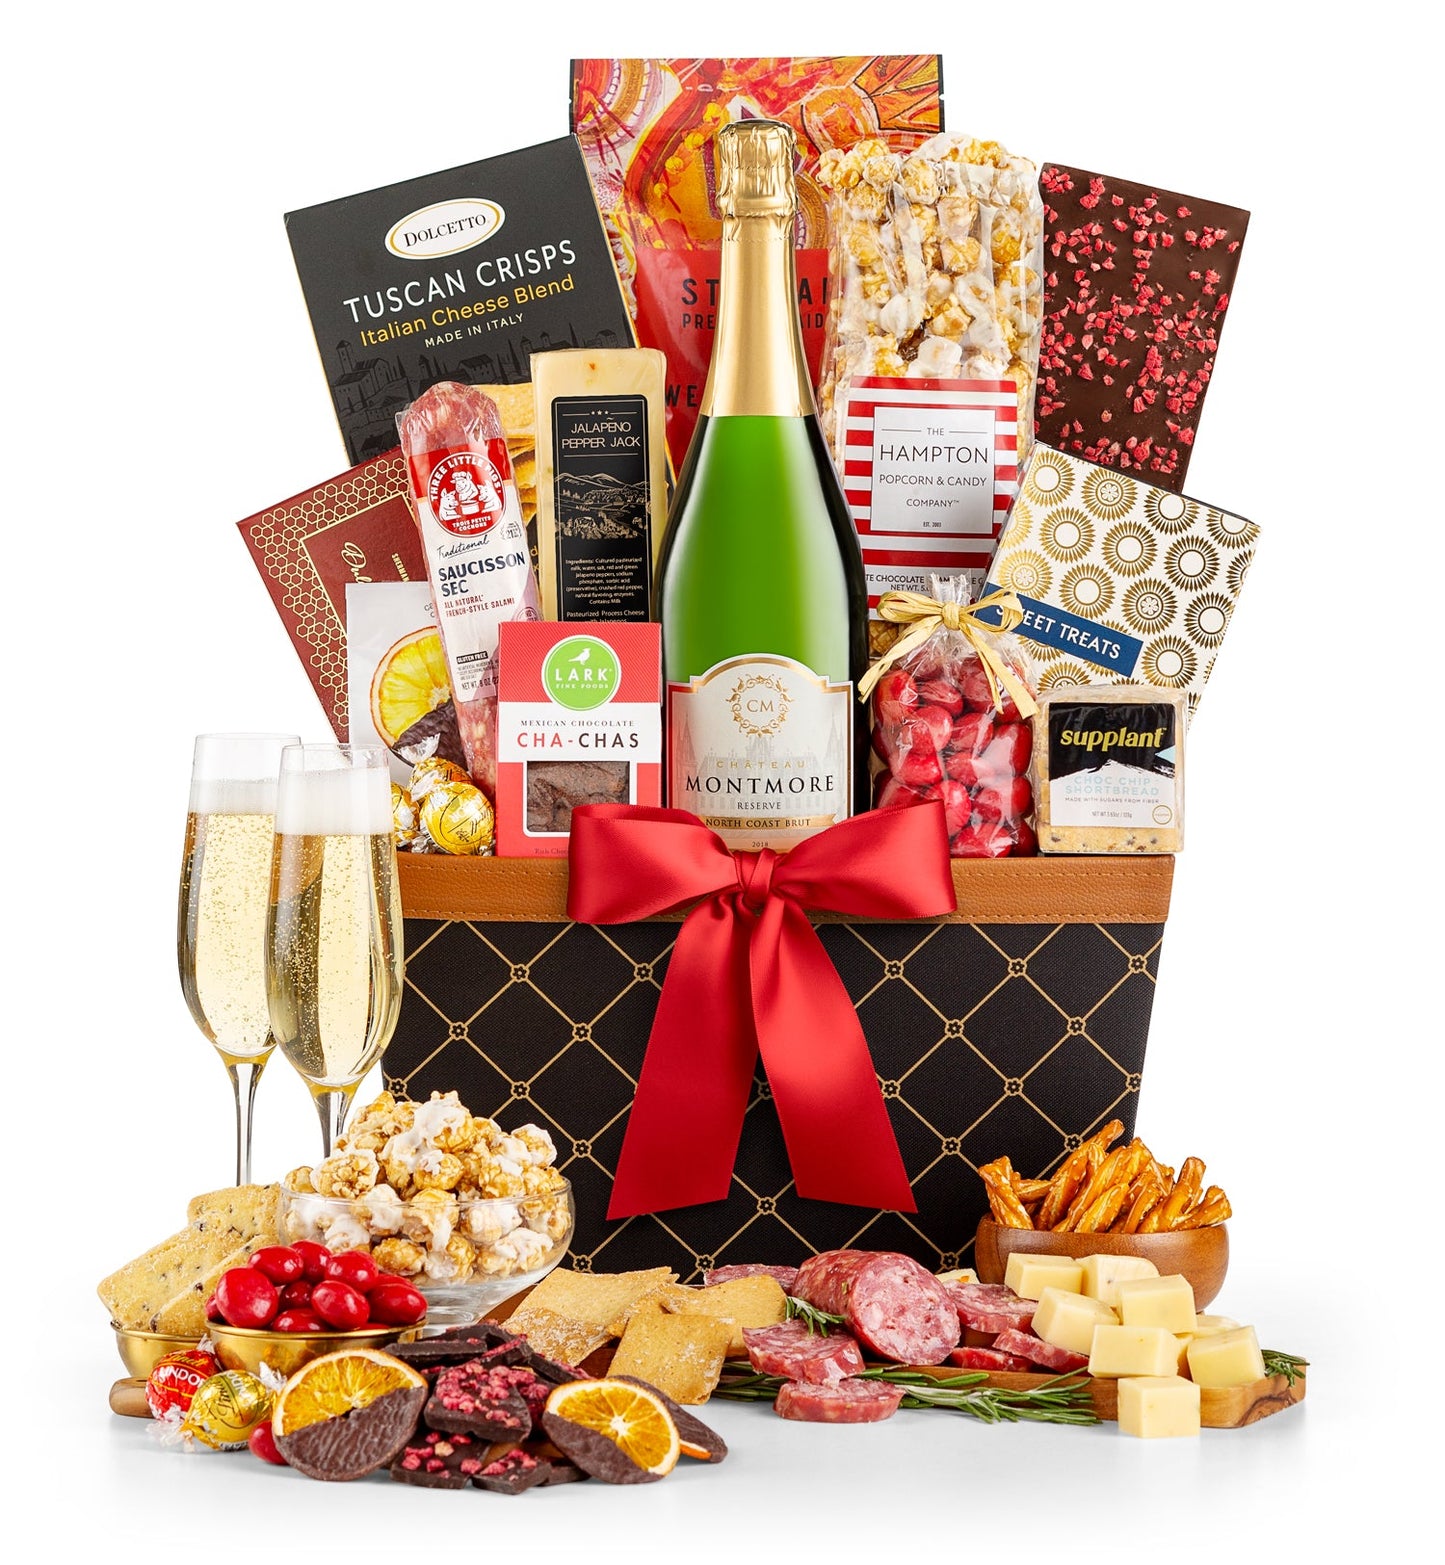 Champagne Wishes Gift Basket with Chateau Montmore Reserve